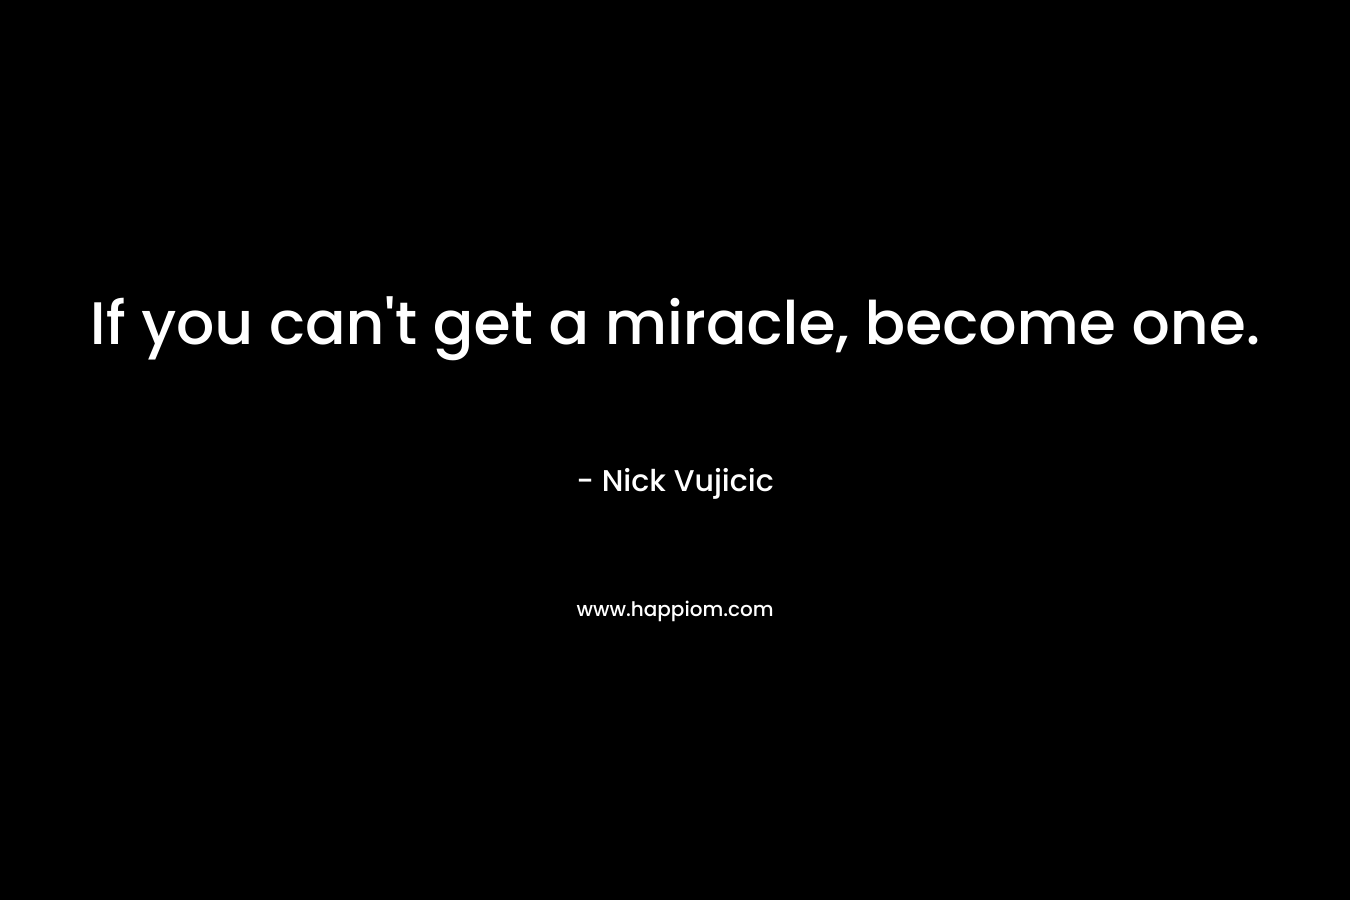 If you can’t get a miracle, become one. – Nick Vujicic